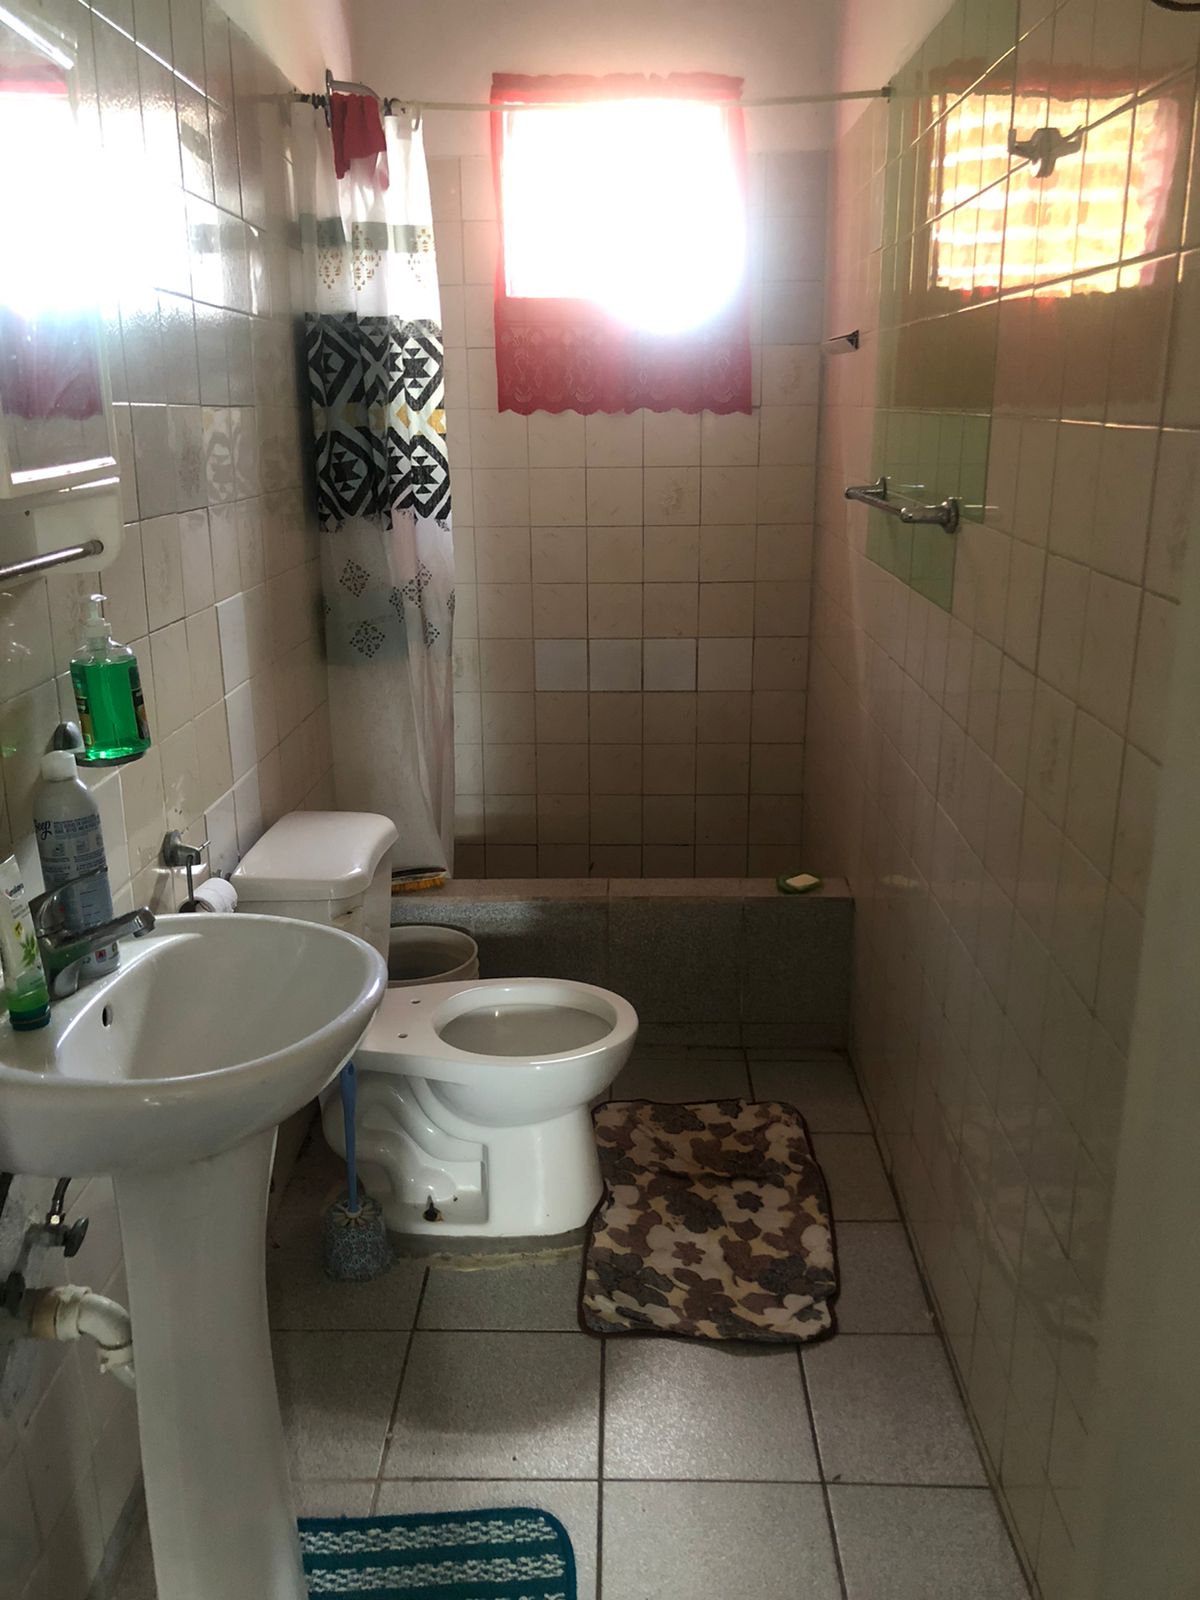 House sale in castries toilet